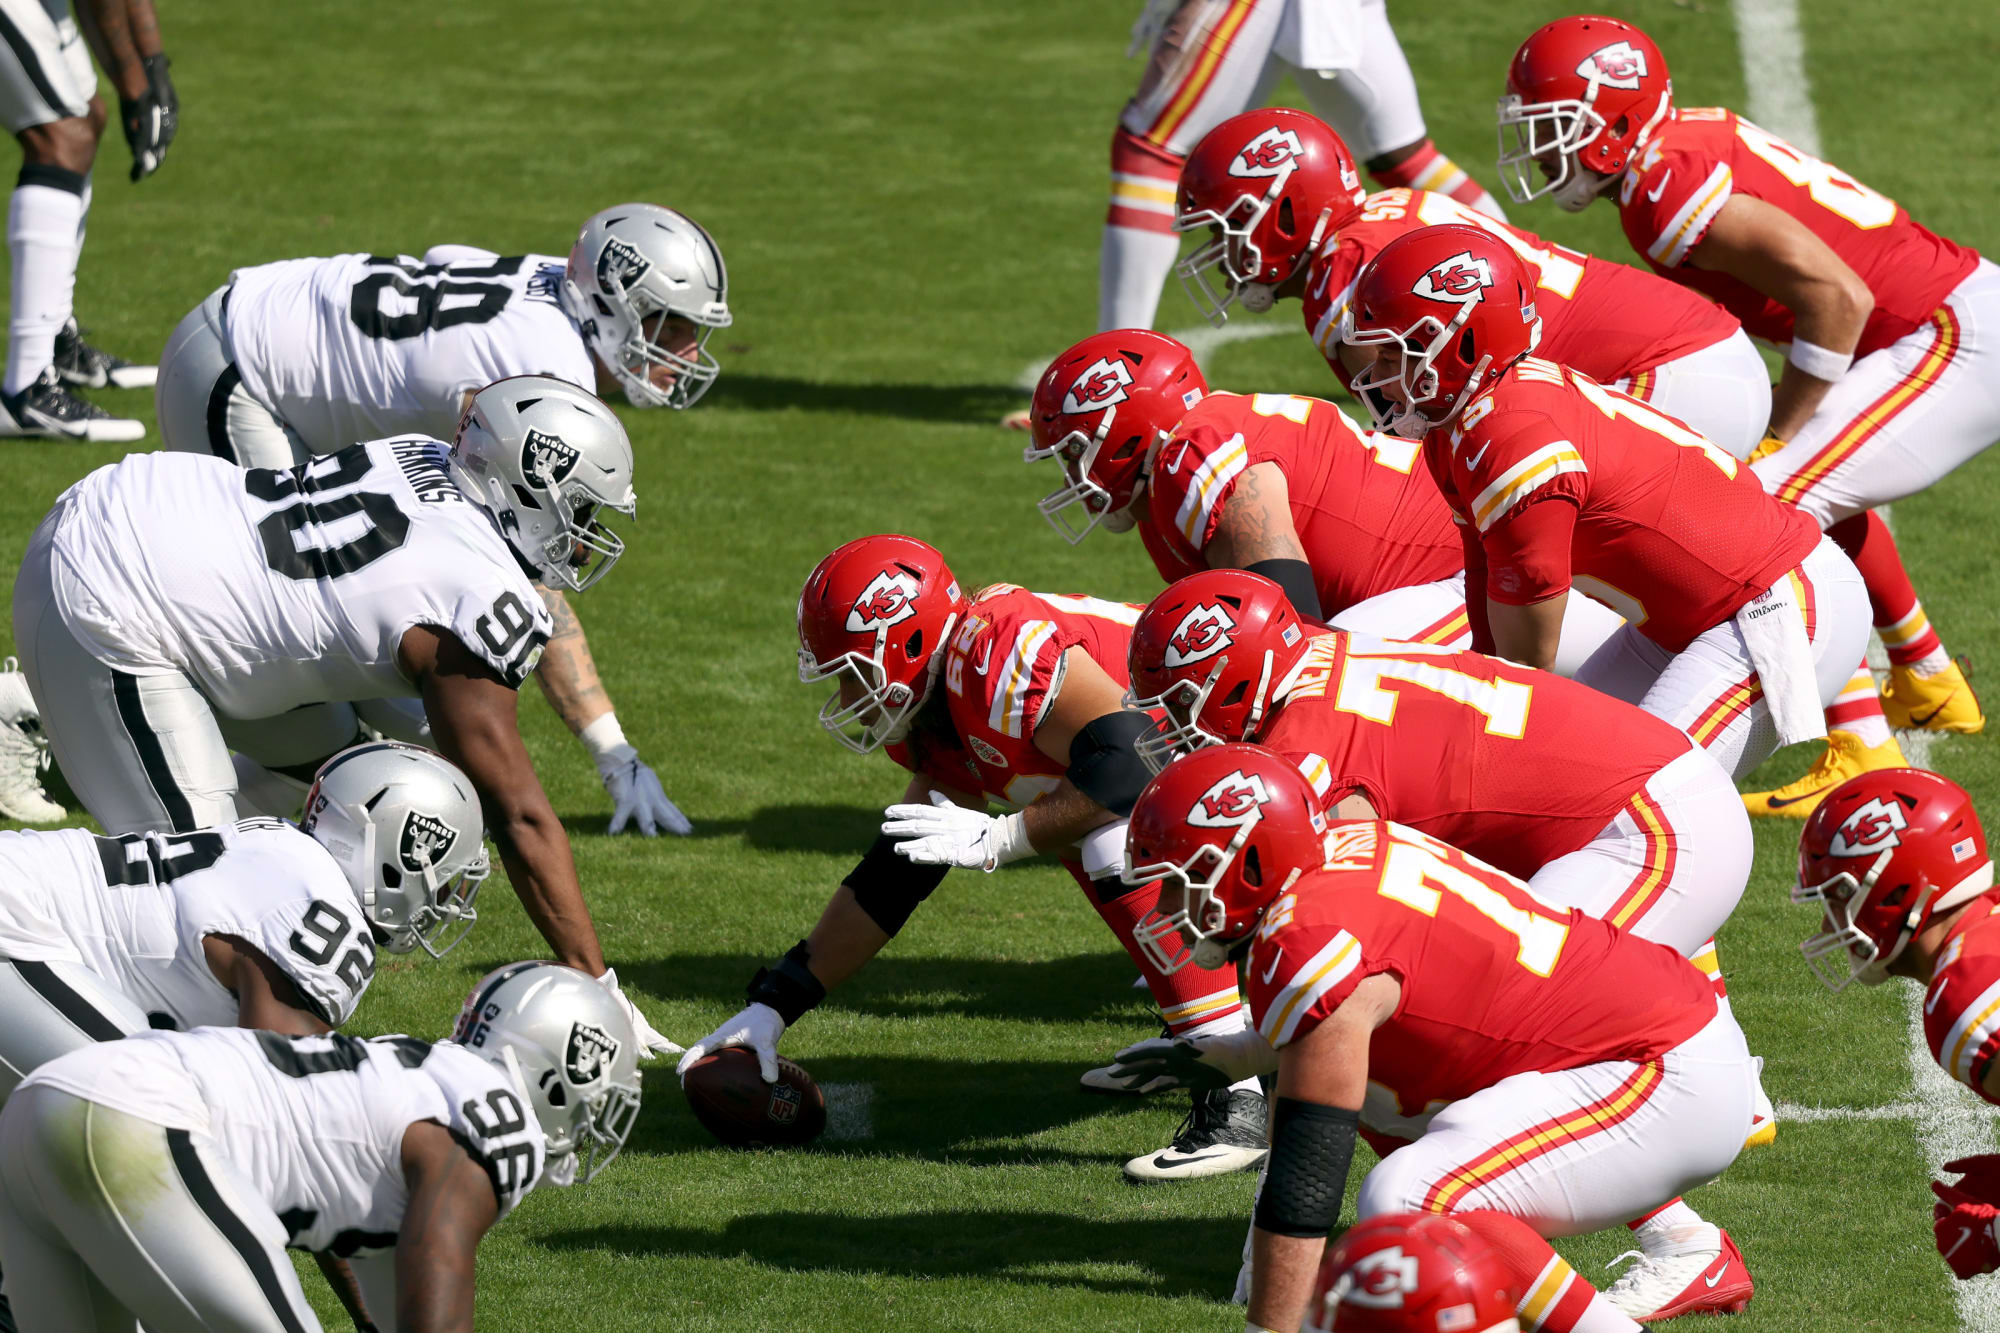 Kansas City Chiefs Why did the Raiders give the Chiefs so much trouble